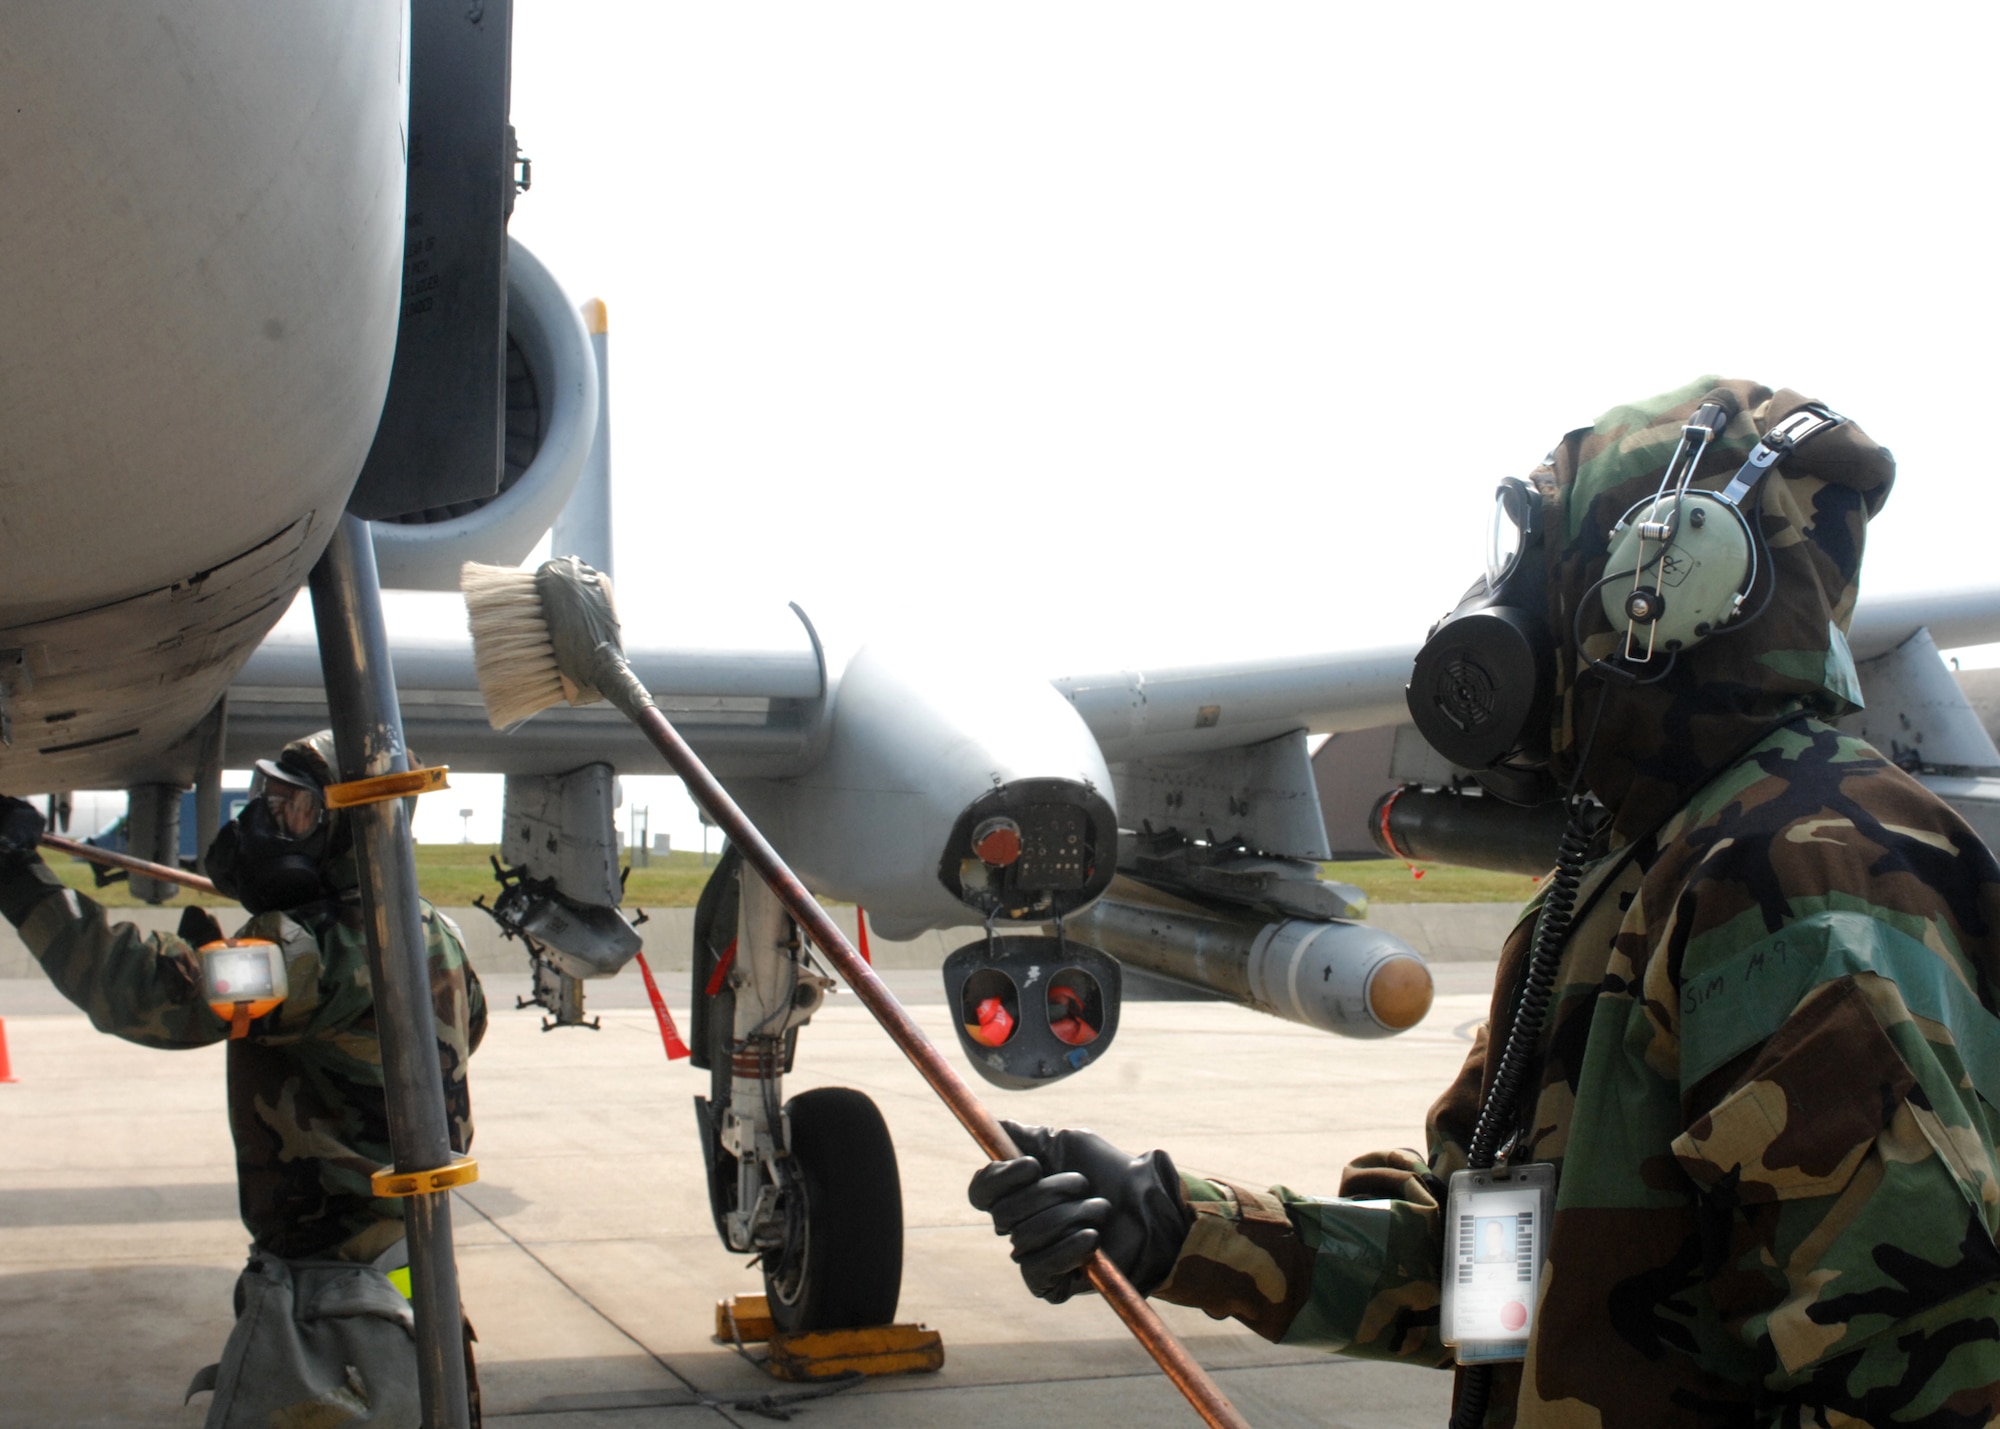 SPANGDAHLEM AIR BASE, Germany -- Senior Airman Bryan Craver and Tech. Sgt. Matthew Coffman, 52nd Aircraft Maintenance Squadron, decontaminate an A-10 Thunderbolt II outside hangars 1 and 2 Aug. 6 during the 52nd Fighter Wing’s Phase II exercise. Airmen were required to decontaminate the jet while in mission oriented protective posture 4 while being evaluated during an inject by the exercise evaluation team in preparation for the upcoming NATO Tactical Evaluation in June 2010. (U.S. Air Force photo/Senior Airman Jenifer H. Calhoun)